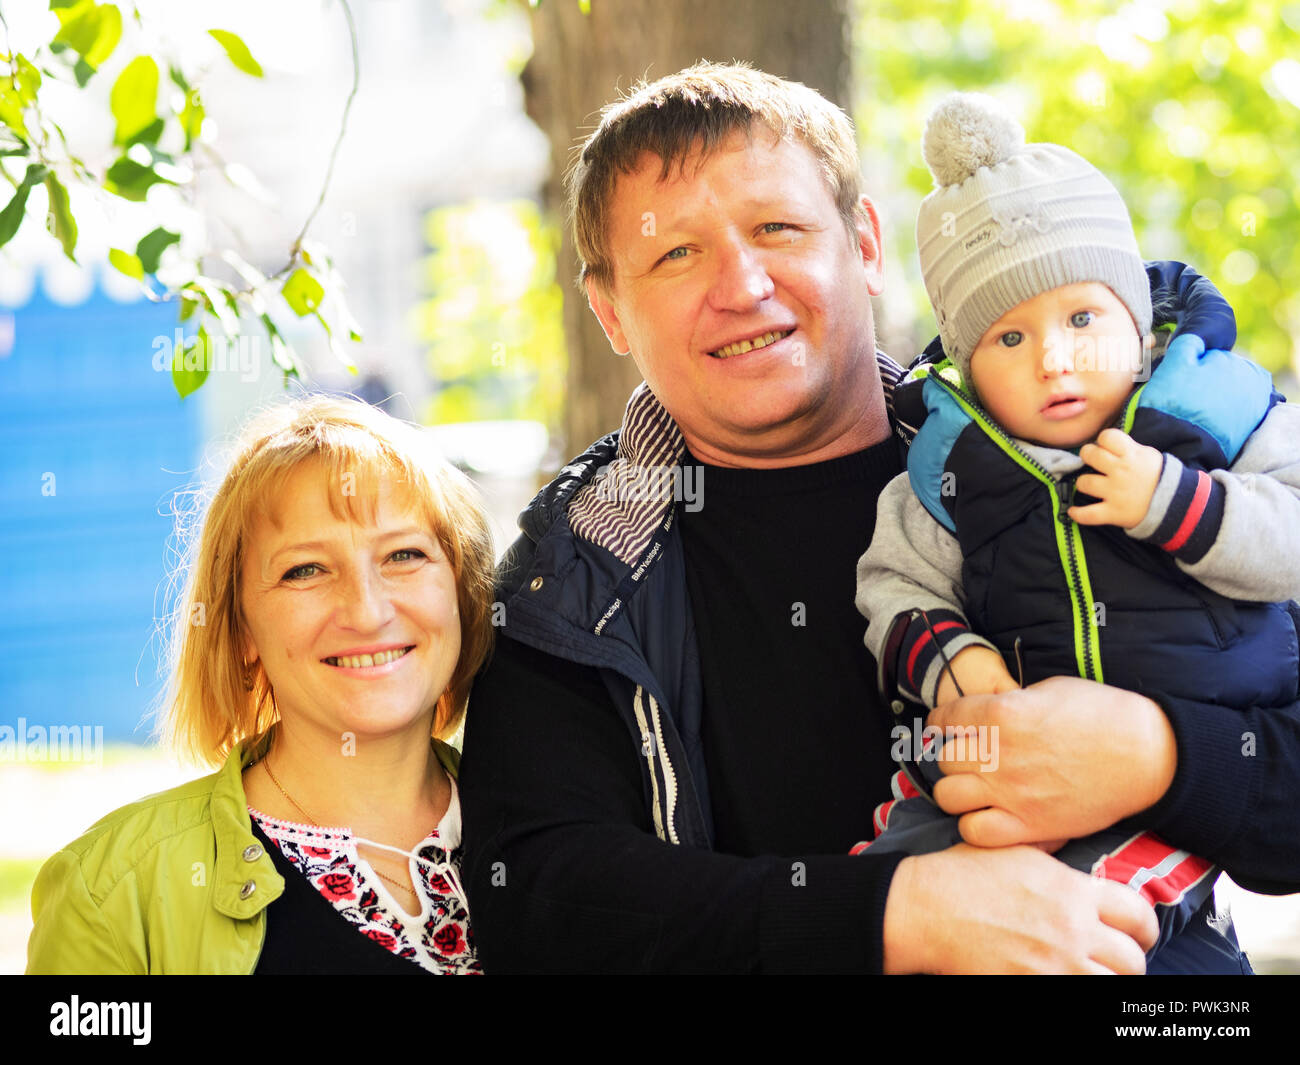 October 14, 2018 - Borisptyl, Kiev, Ukraine - Modern Ukrainian family seen during the celebrations..The Protection of the Virgin is a national holiday celebrated by the Ukrainian Orthodox Church. On this day, at the same time, the holiday of the Ukrainian Cossacks, the Day of the creation of the Ukrainian Rebel Army and the Day of Defender of Ukraine are celebrated. (Credit Image: © Igor Golovniov/SOPA Images via ZUMA Wire) Stock Photo